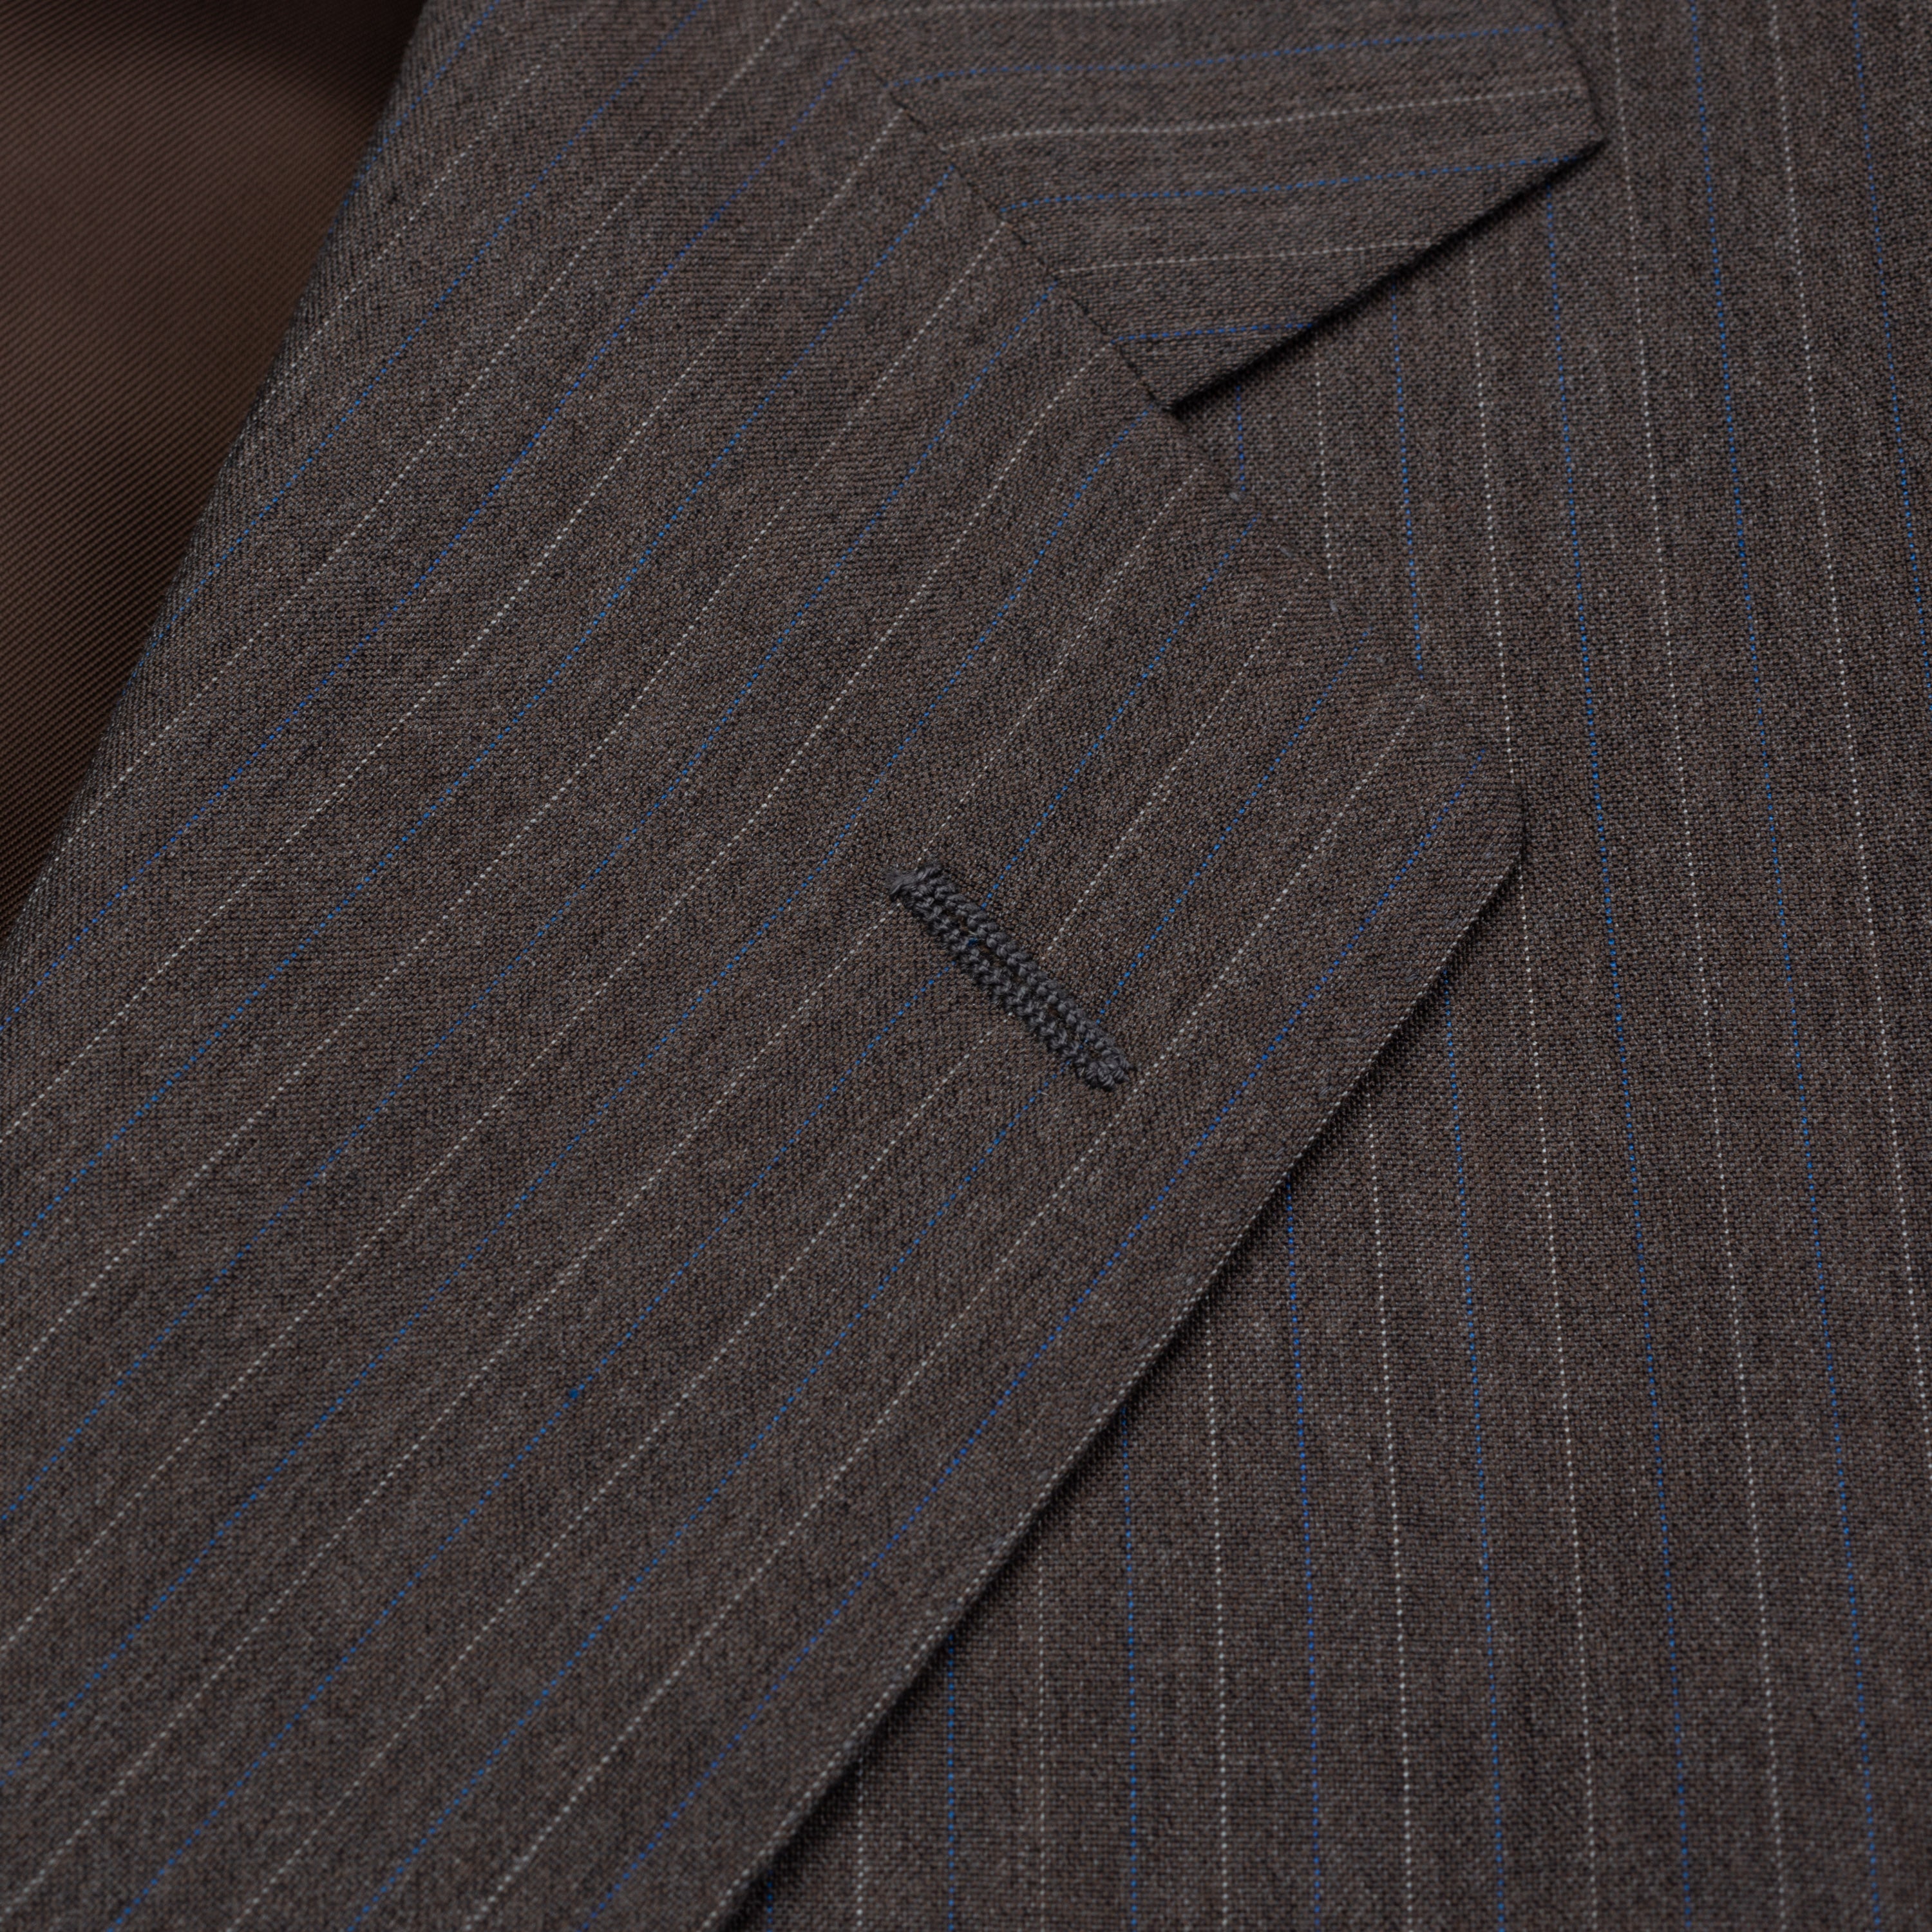 CASTANGIA 1850 Taupe Gray Striped Wool-Cotton Business Suit NEW CASTANGIA